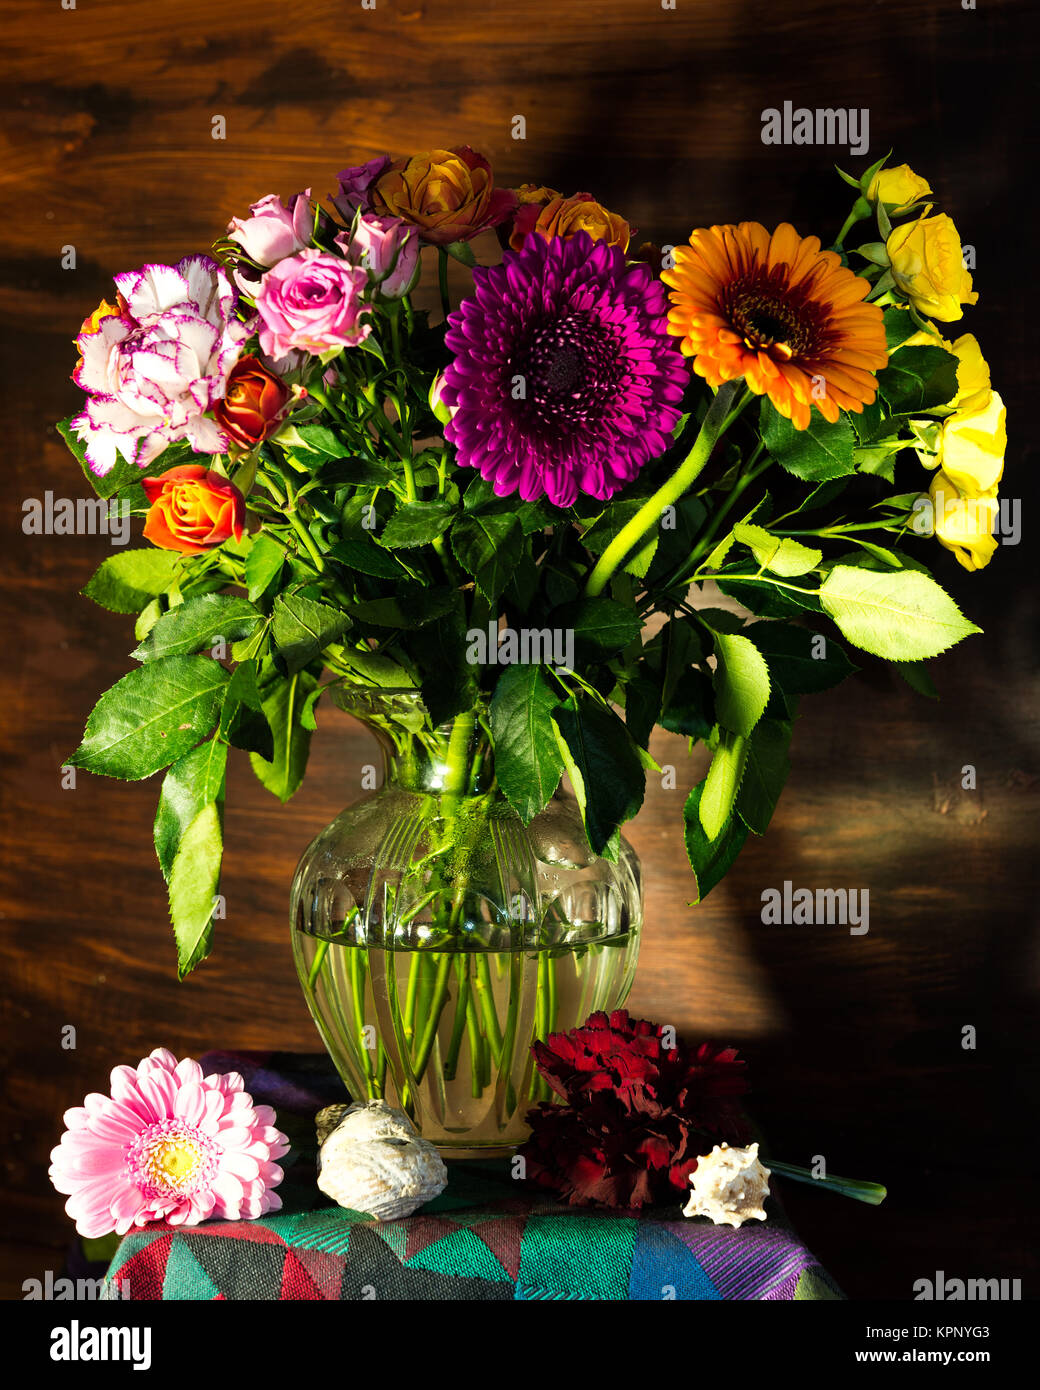 Flower still life with glass vase and a colourful bouquet of flowers Stock Photo